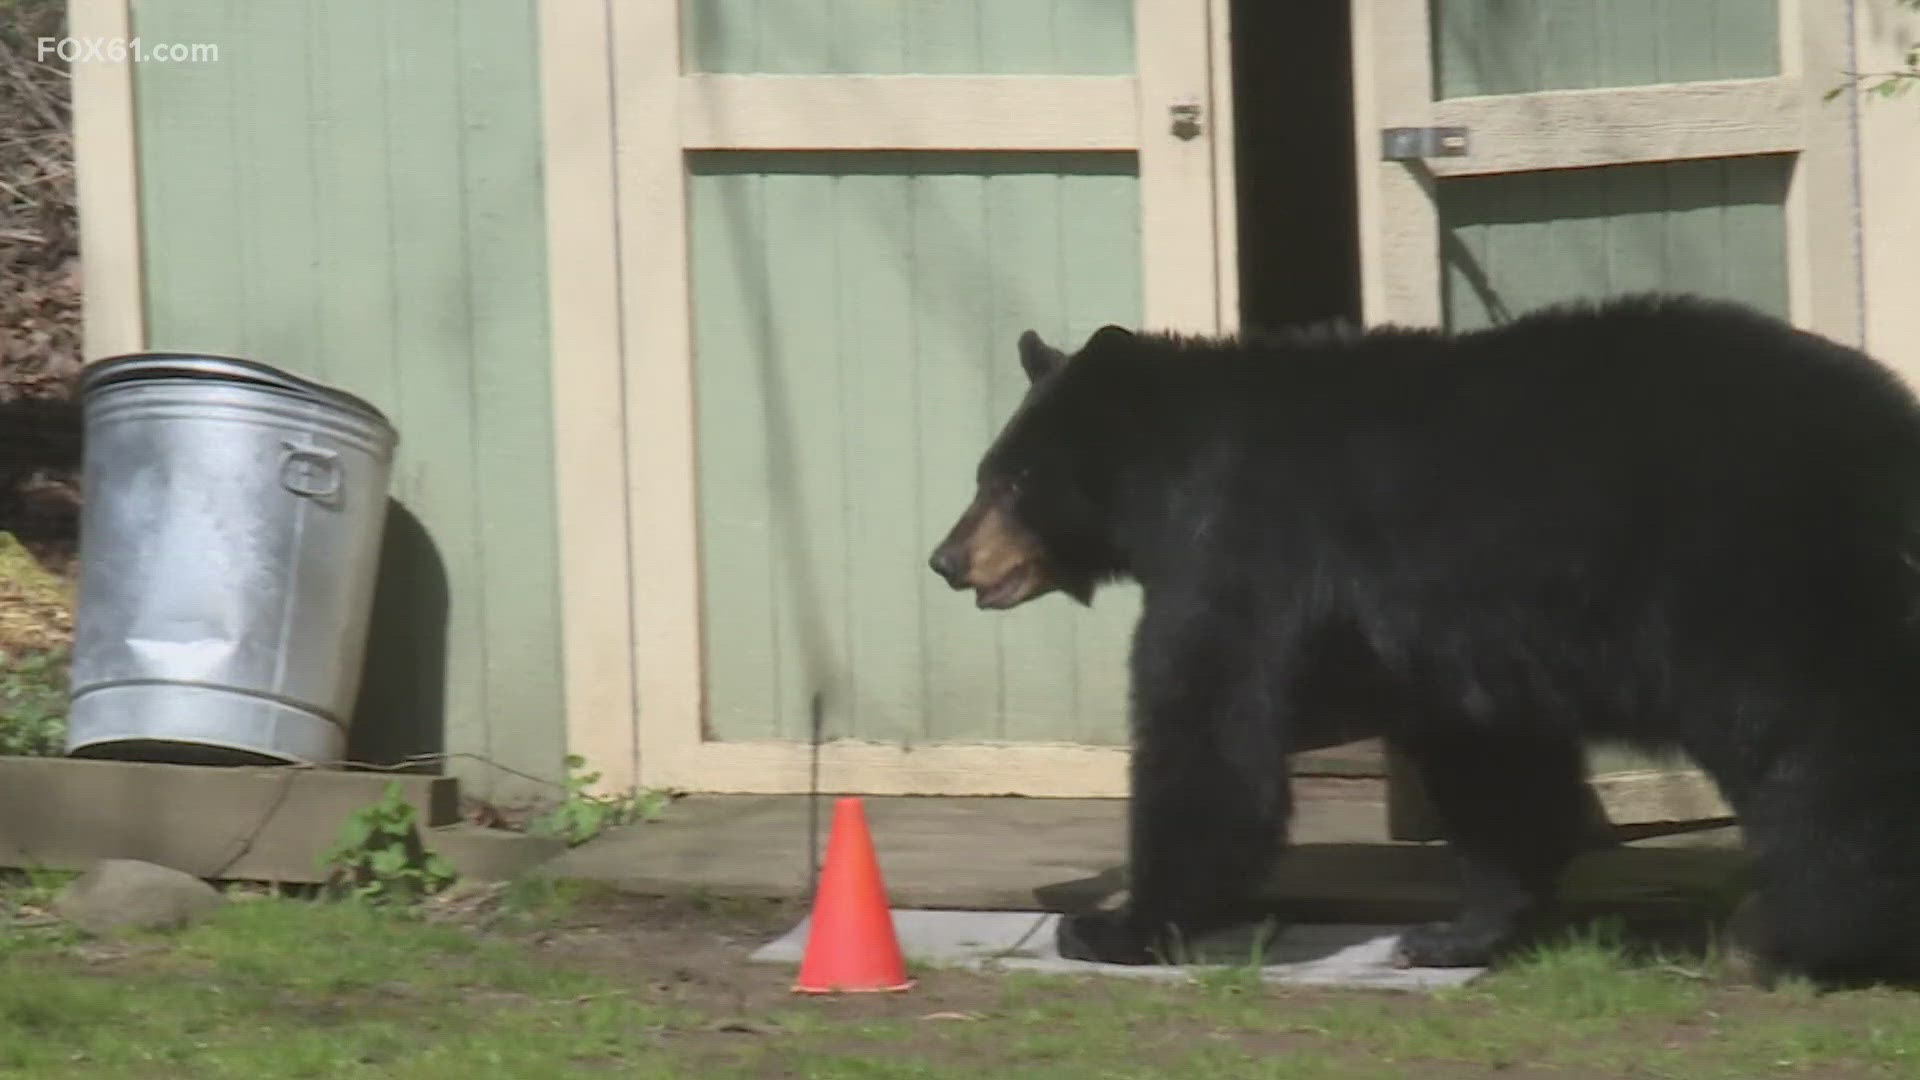 As the bear population continues to grow, experts from DEEP, EnCon Police Officers and Simsbury Animal Control invited residents to learn how to become 'bear aware.'